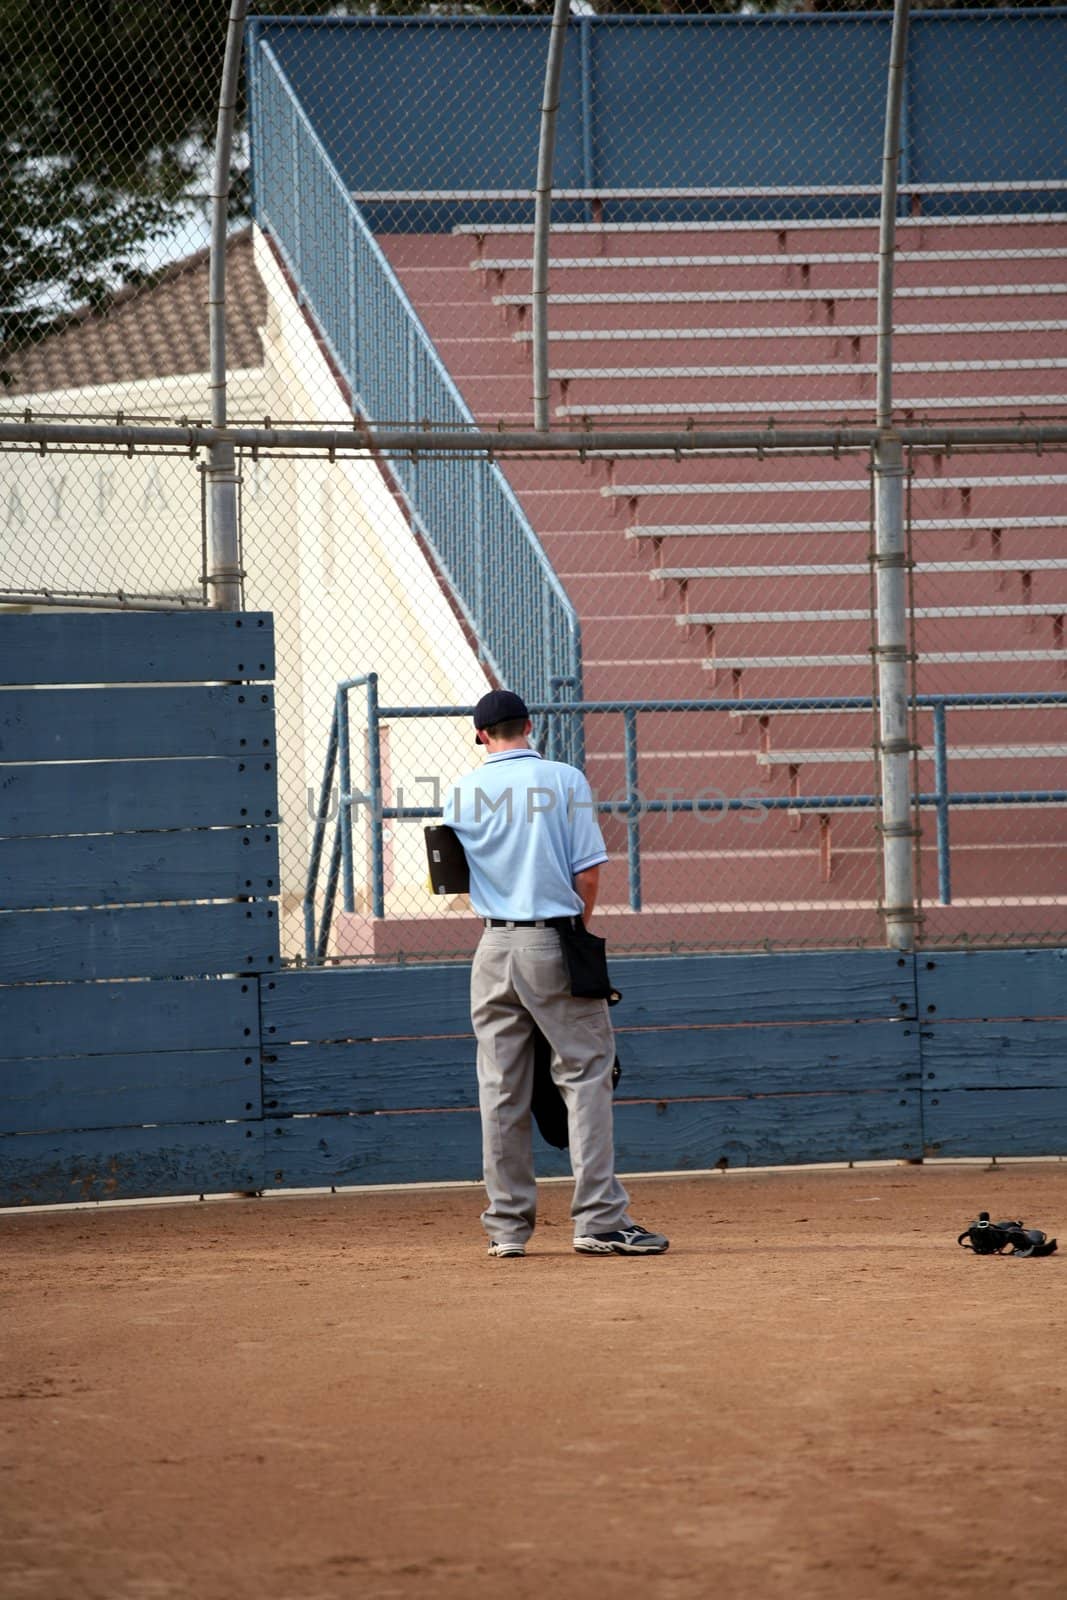 Lone umpire by scrappinstacy